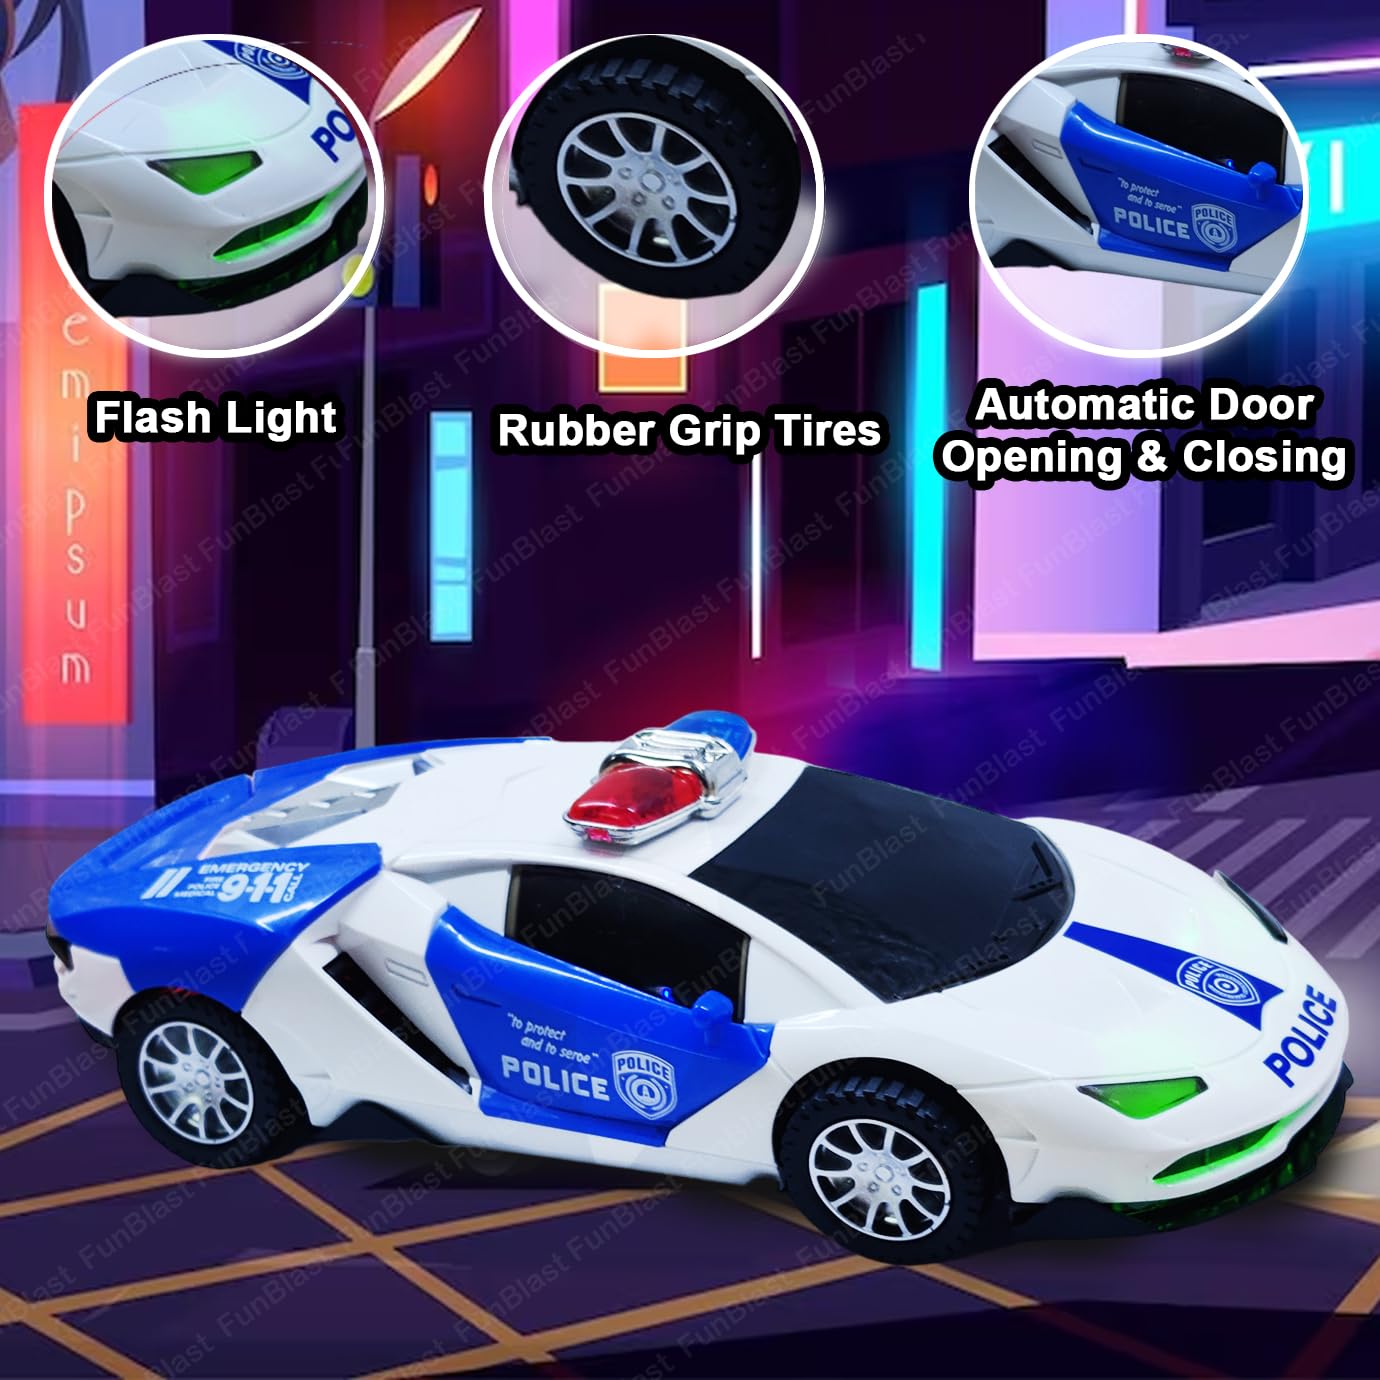 Police Car Toy, Car Toy for Kids with 360 Degree Rotation & Door Opening Siren Sound, B/O Toy Car, Sound & Light Toys for Kids Boys & Girls - Multicolor